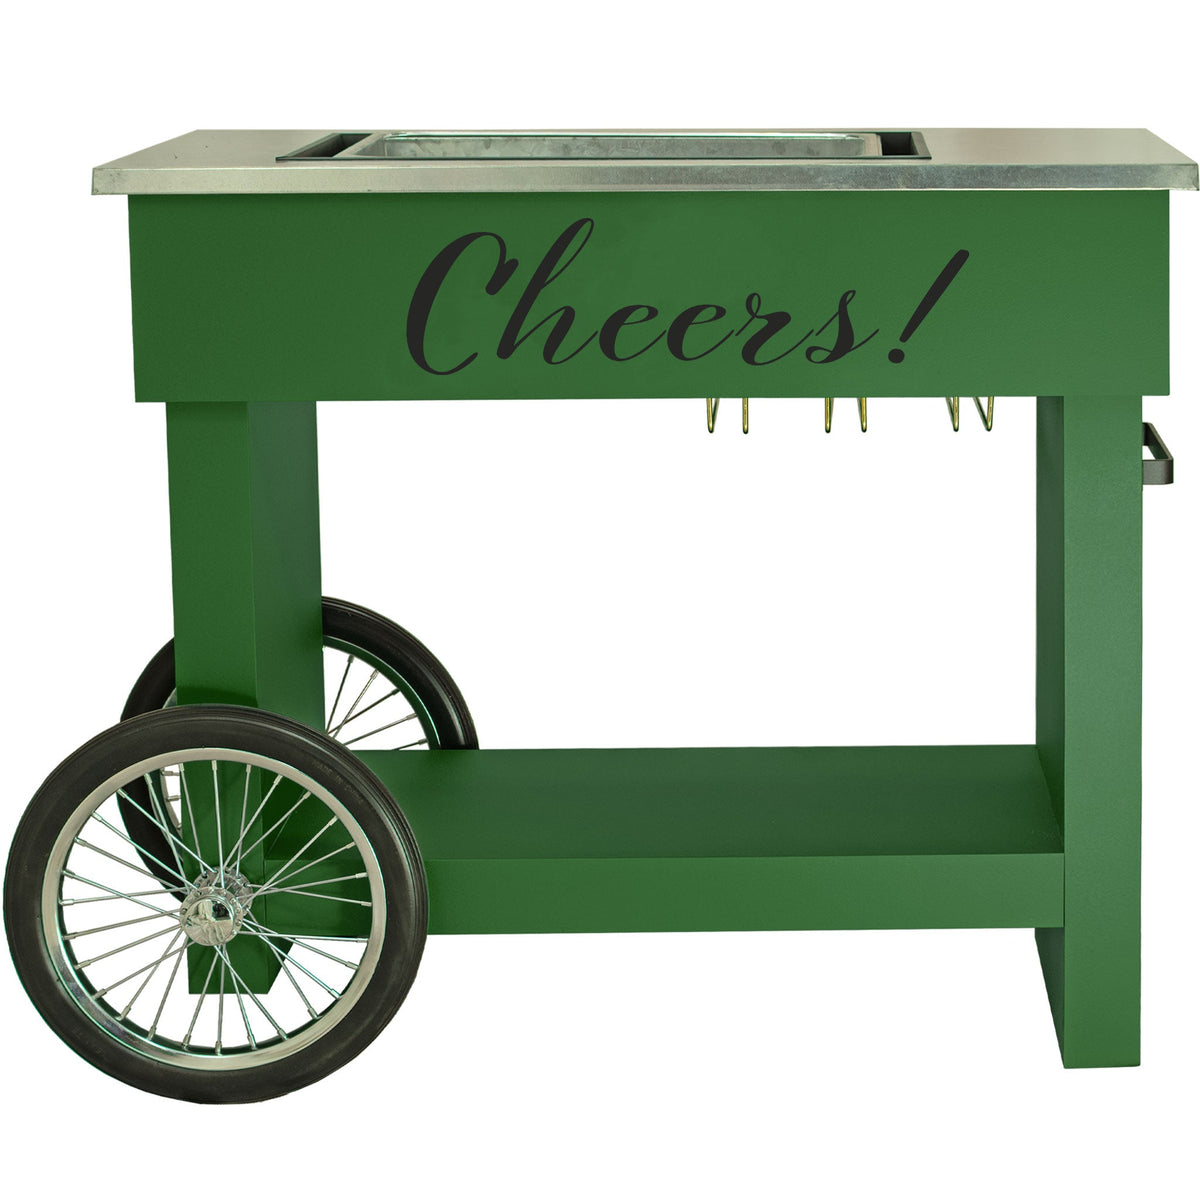 Lee Display's Champagne and Wine Bar Cart with Wheels in Green Color and a Cheers! Decal